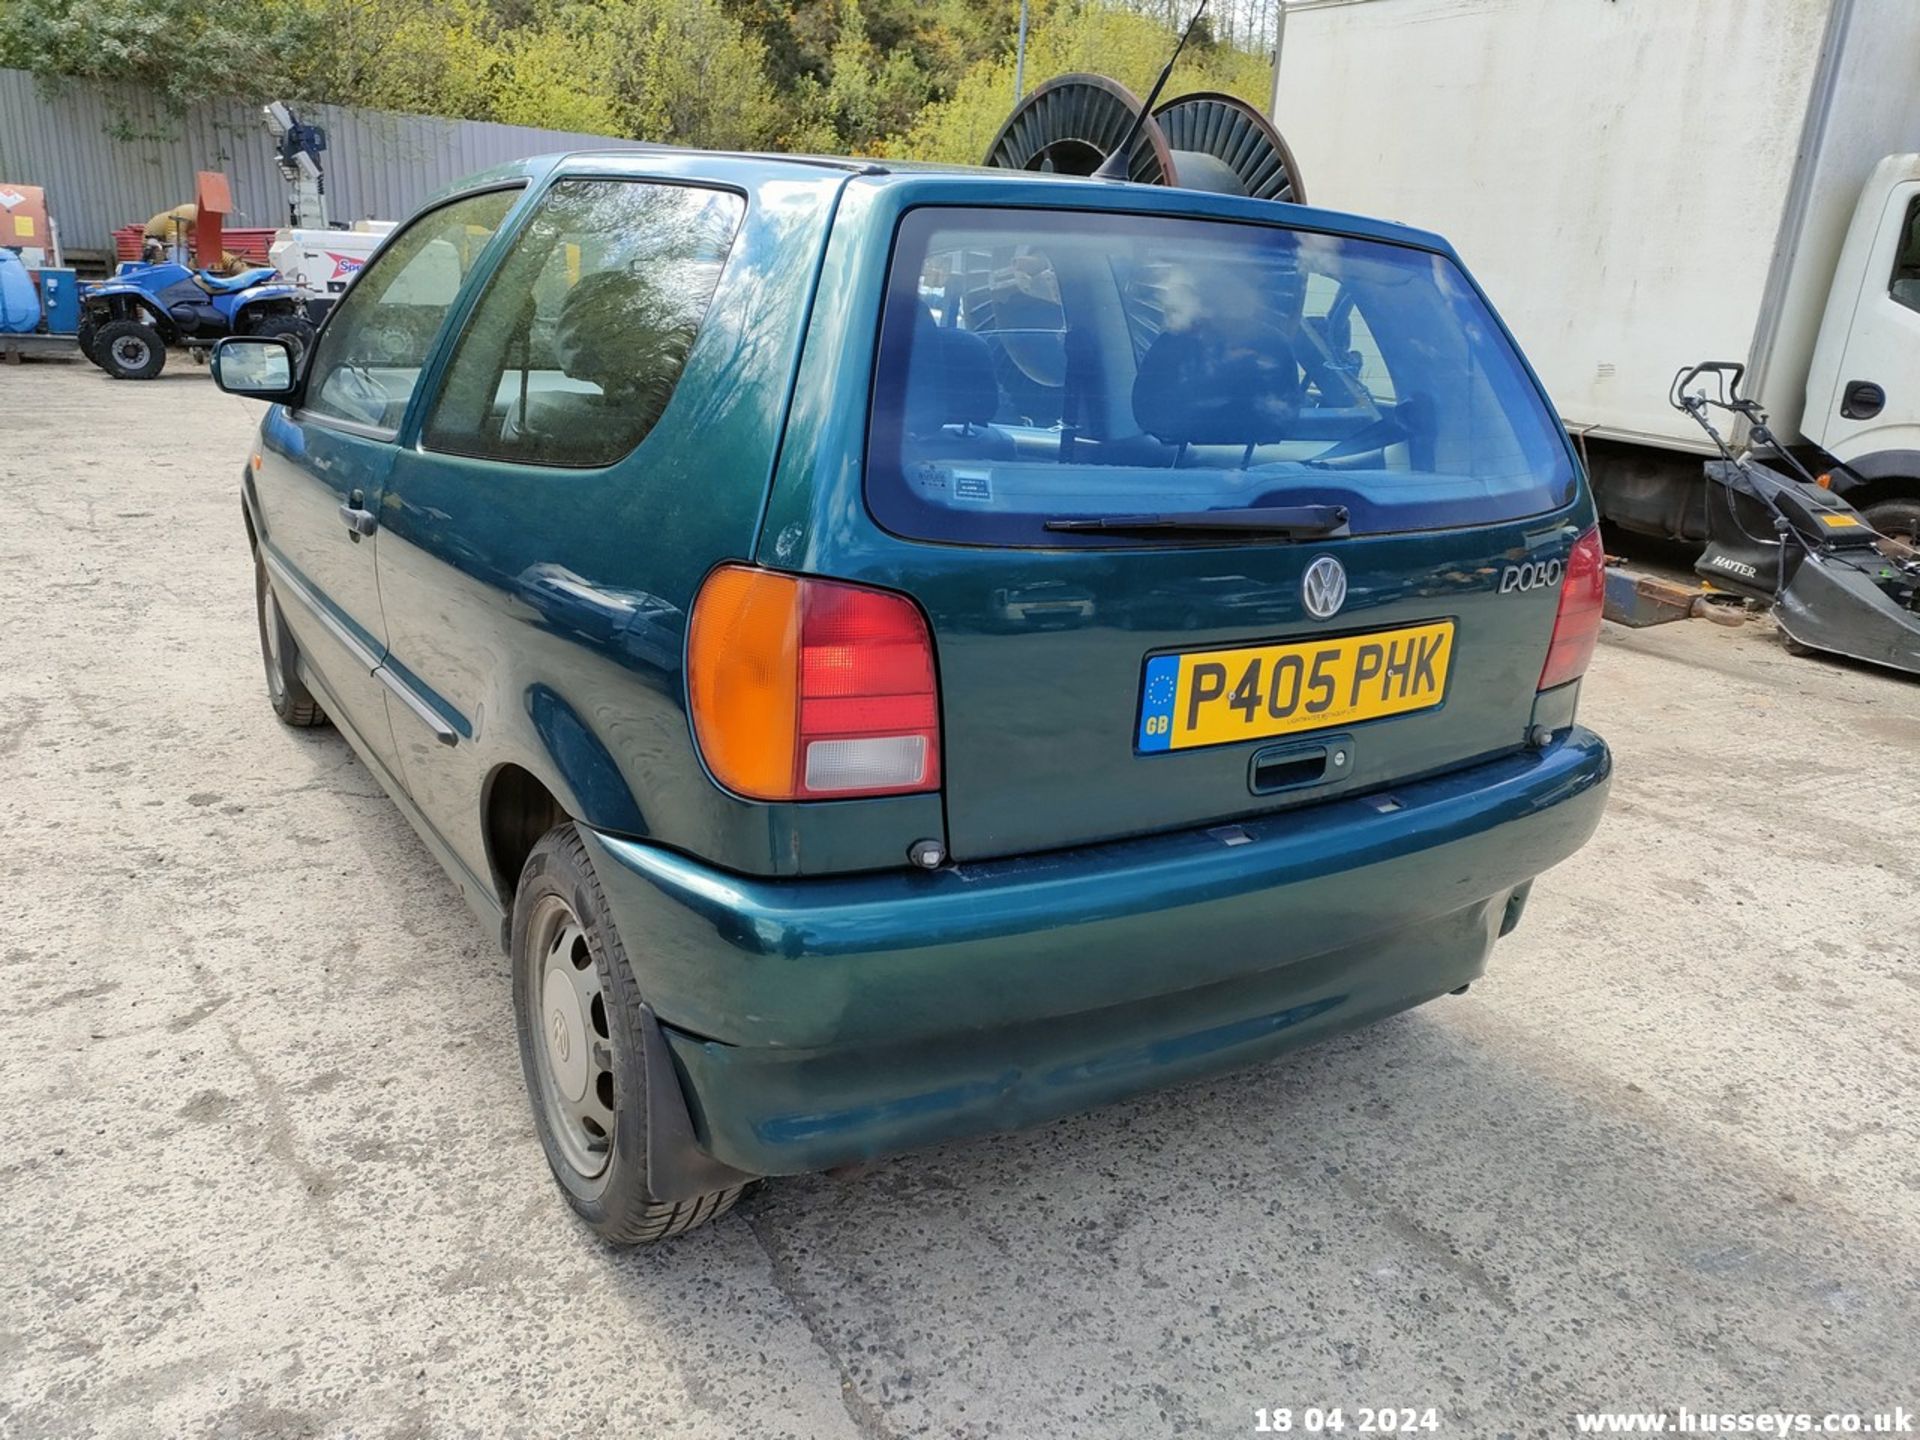 1997 VOLKSWAGEN POLO 1.4 CL AUTO - 1390cc 3dr Hatchback (Green, 68k) - Image 29 of 60